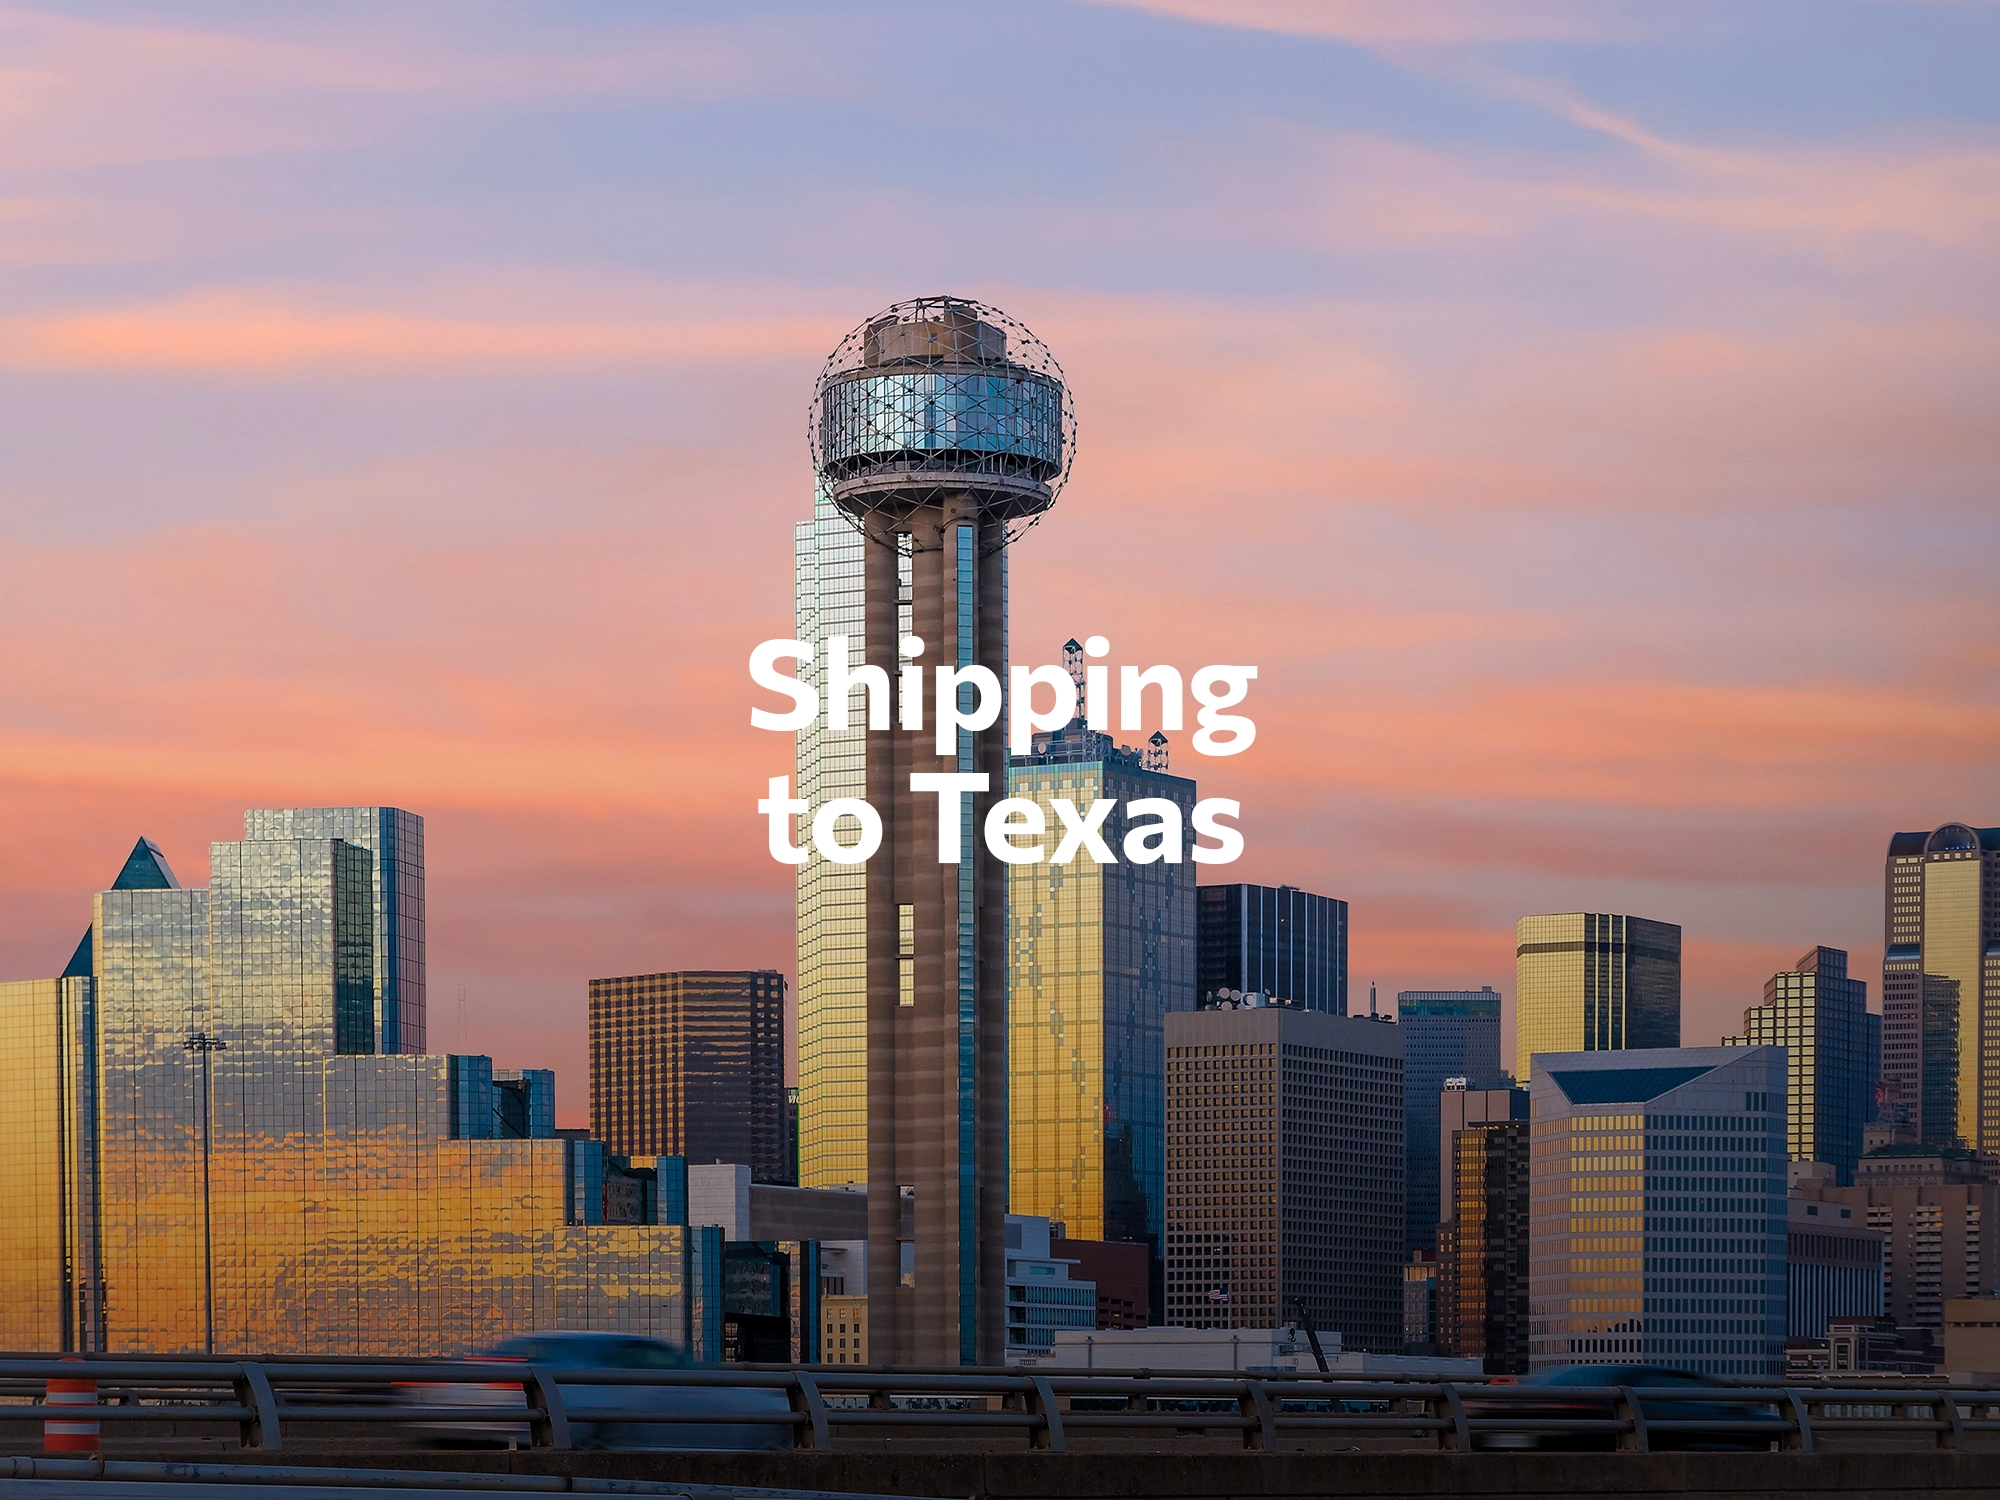 Shipping company to Arizona, freight rates for FTL and LTL shipping in Arizona